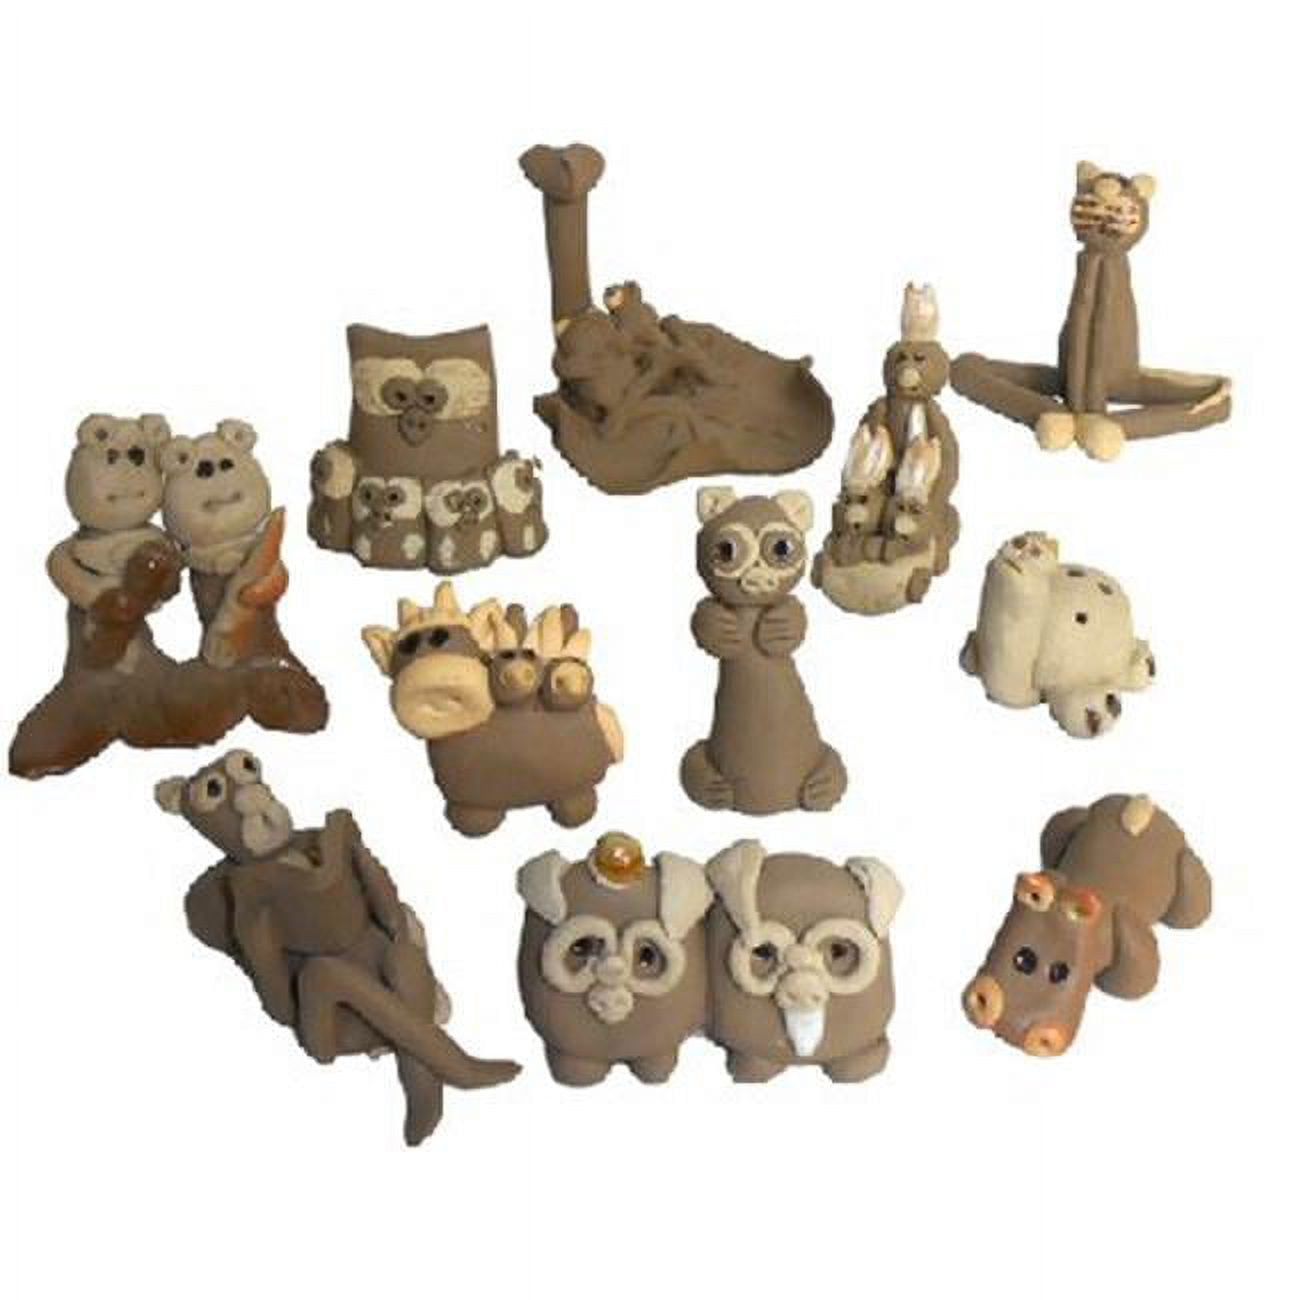 Picture of Bonsai Boy e3108 Whimsical Animal Mud Figurines - 12 Piece